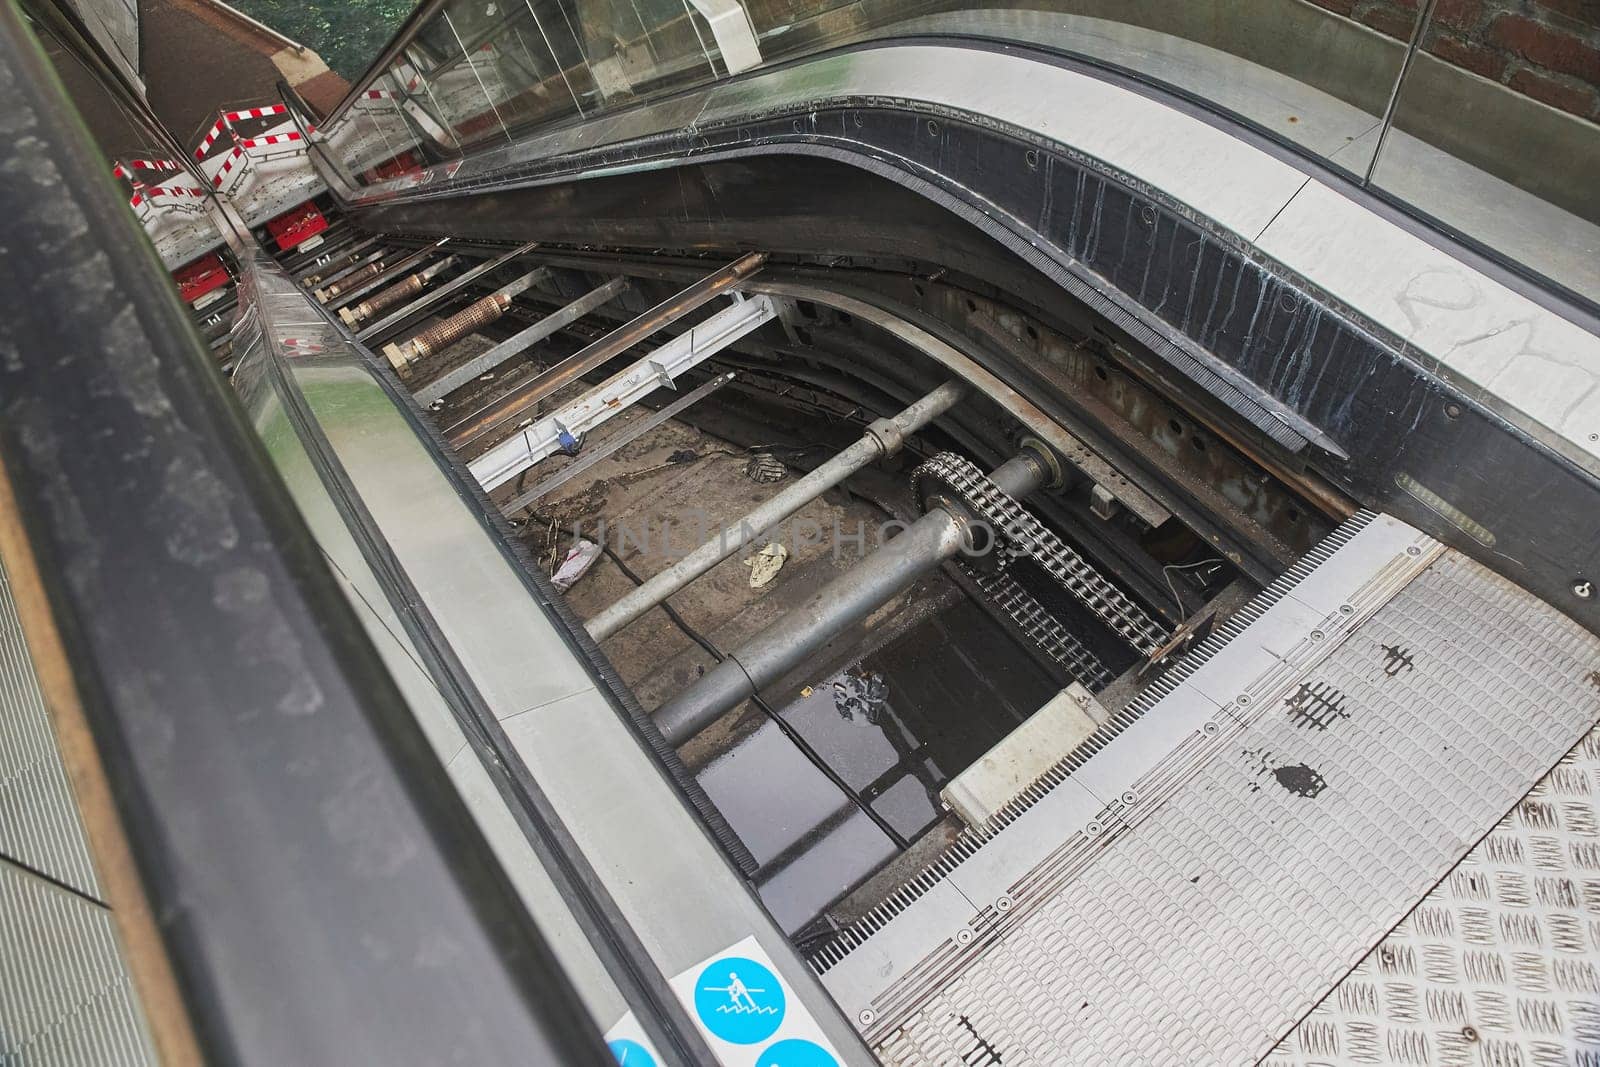 Broken escalator in the Netherlands. The insides are open.